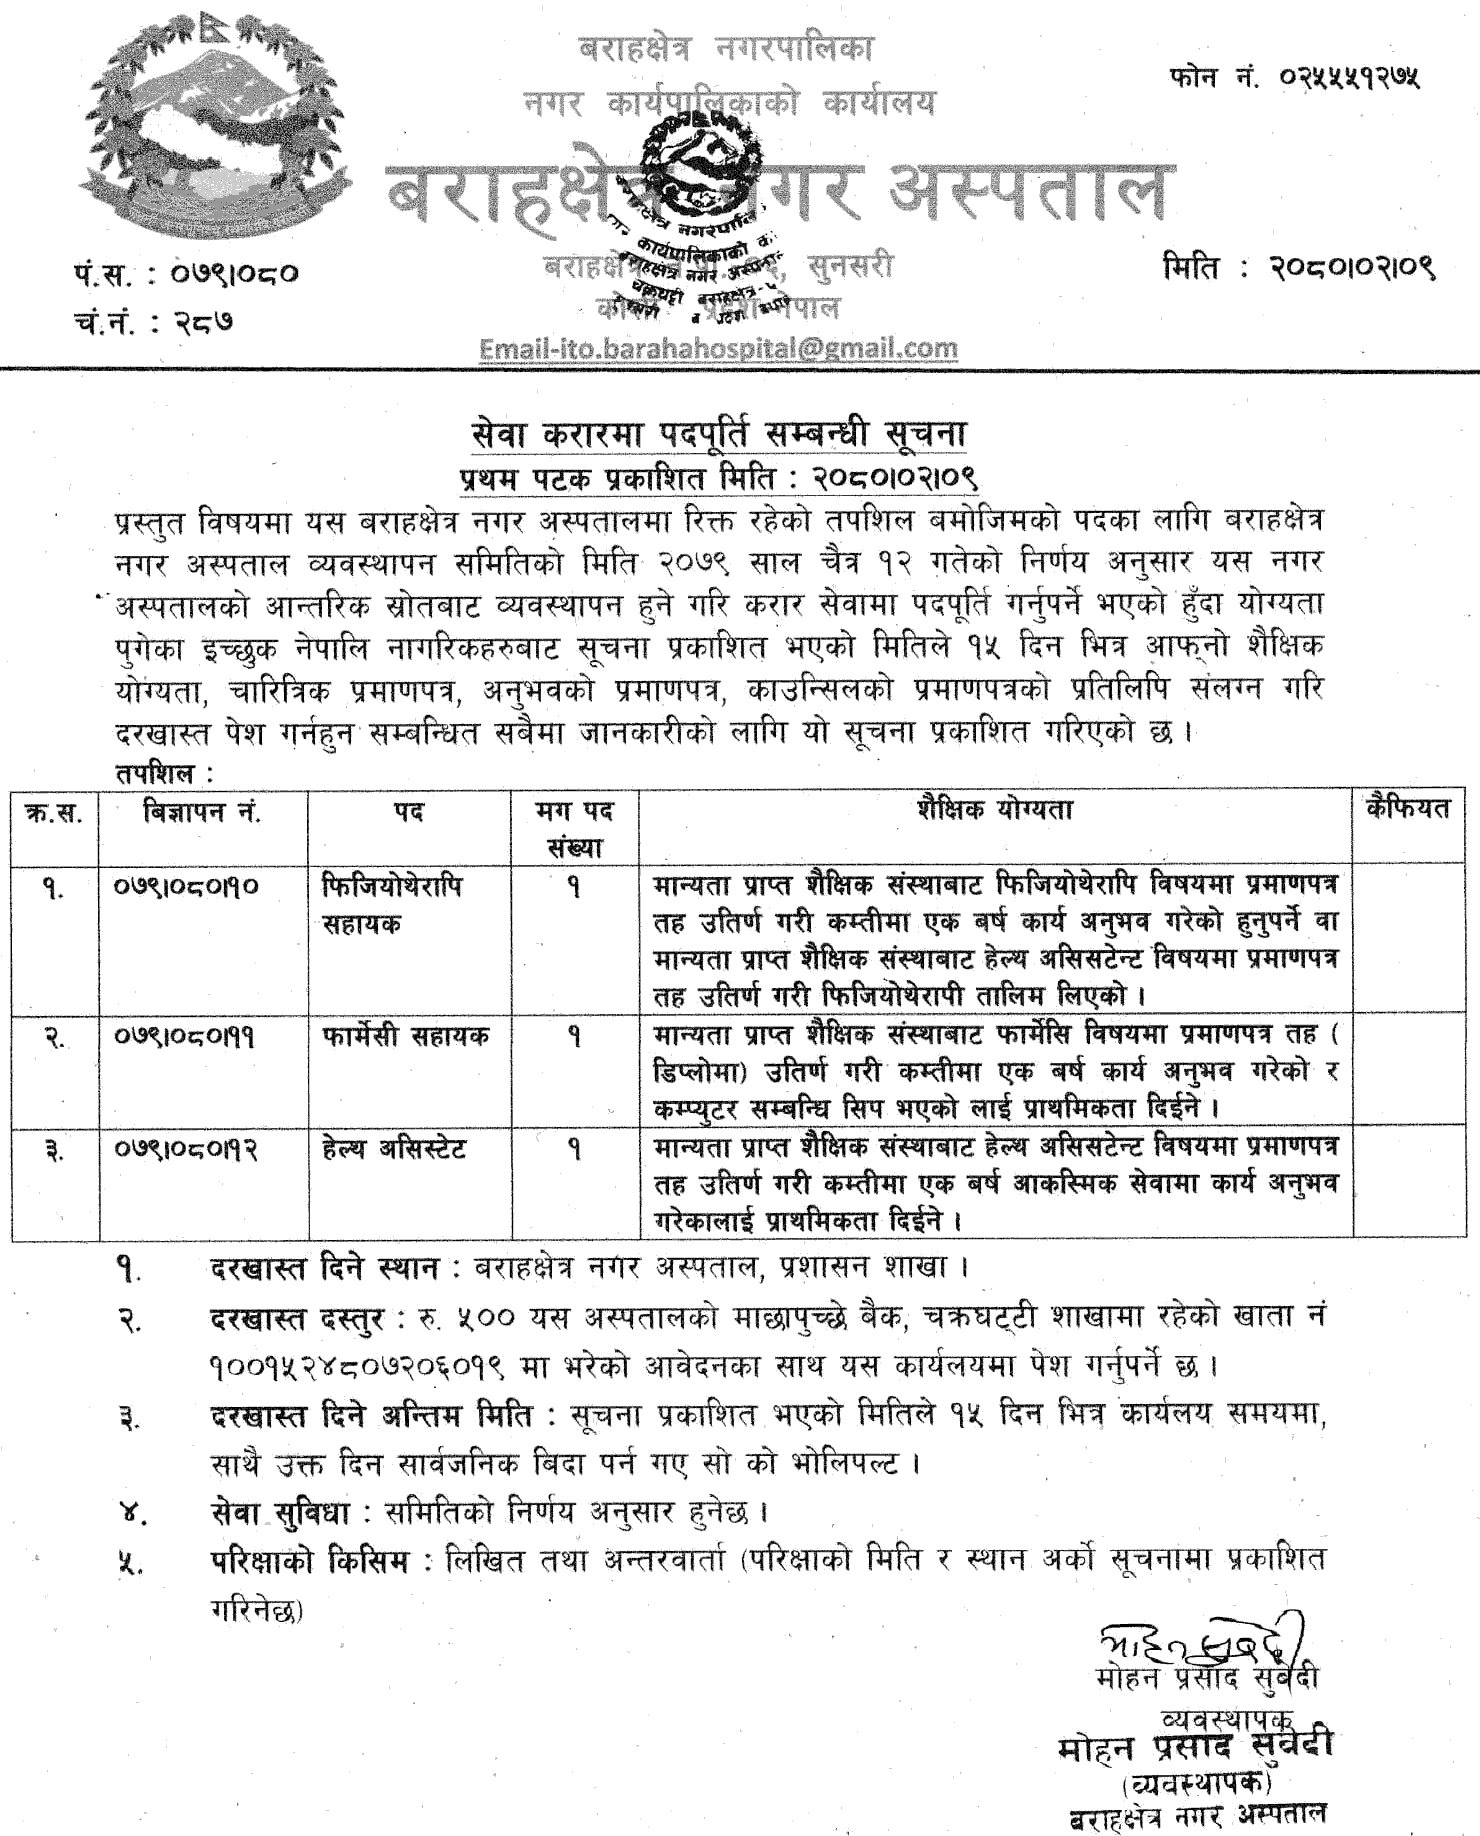 Barahakshetra Municipality Vacancy for Physiotherapy Assistant, Pharmacy Assistant and HA